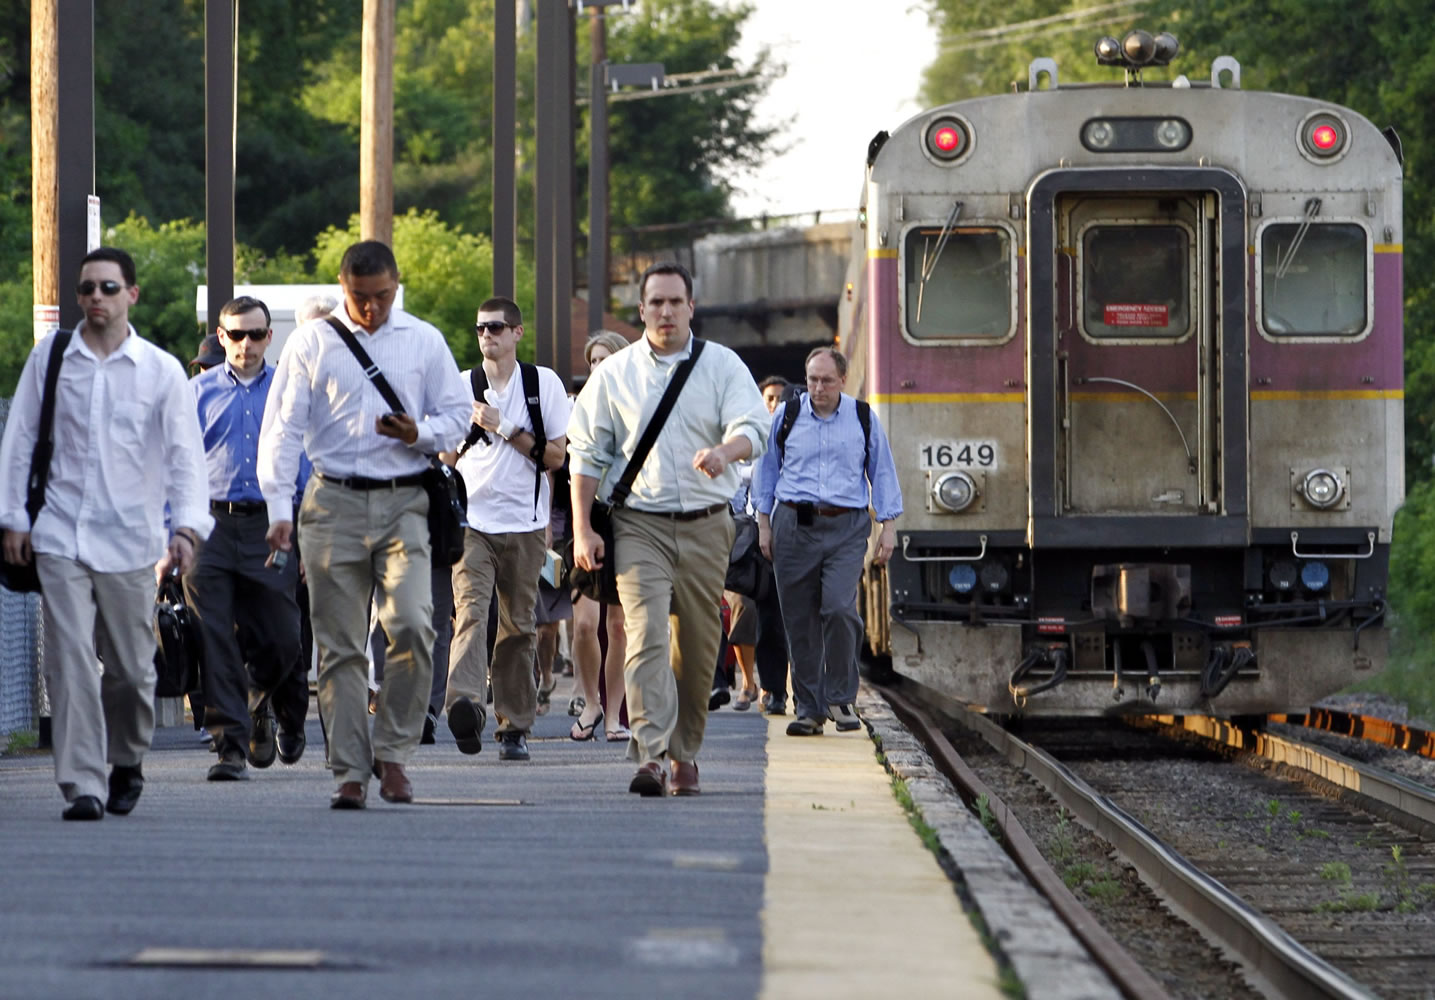 Commuters walk  June 7 on the platform at the Massachusetts Bay Transportation Authority train station in Andover, Mass.